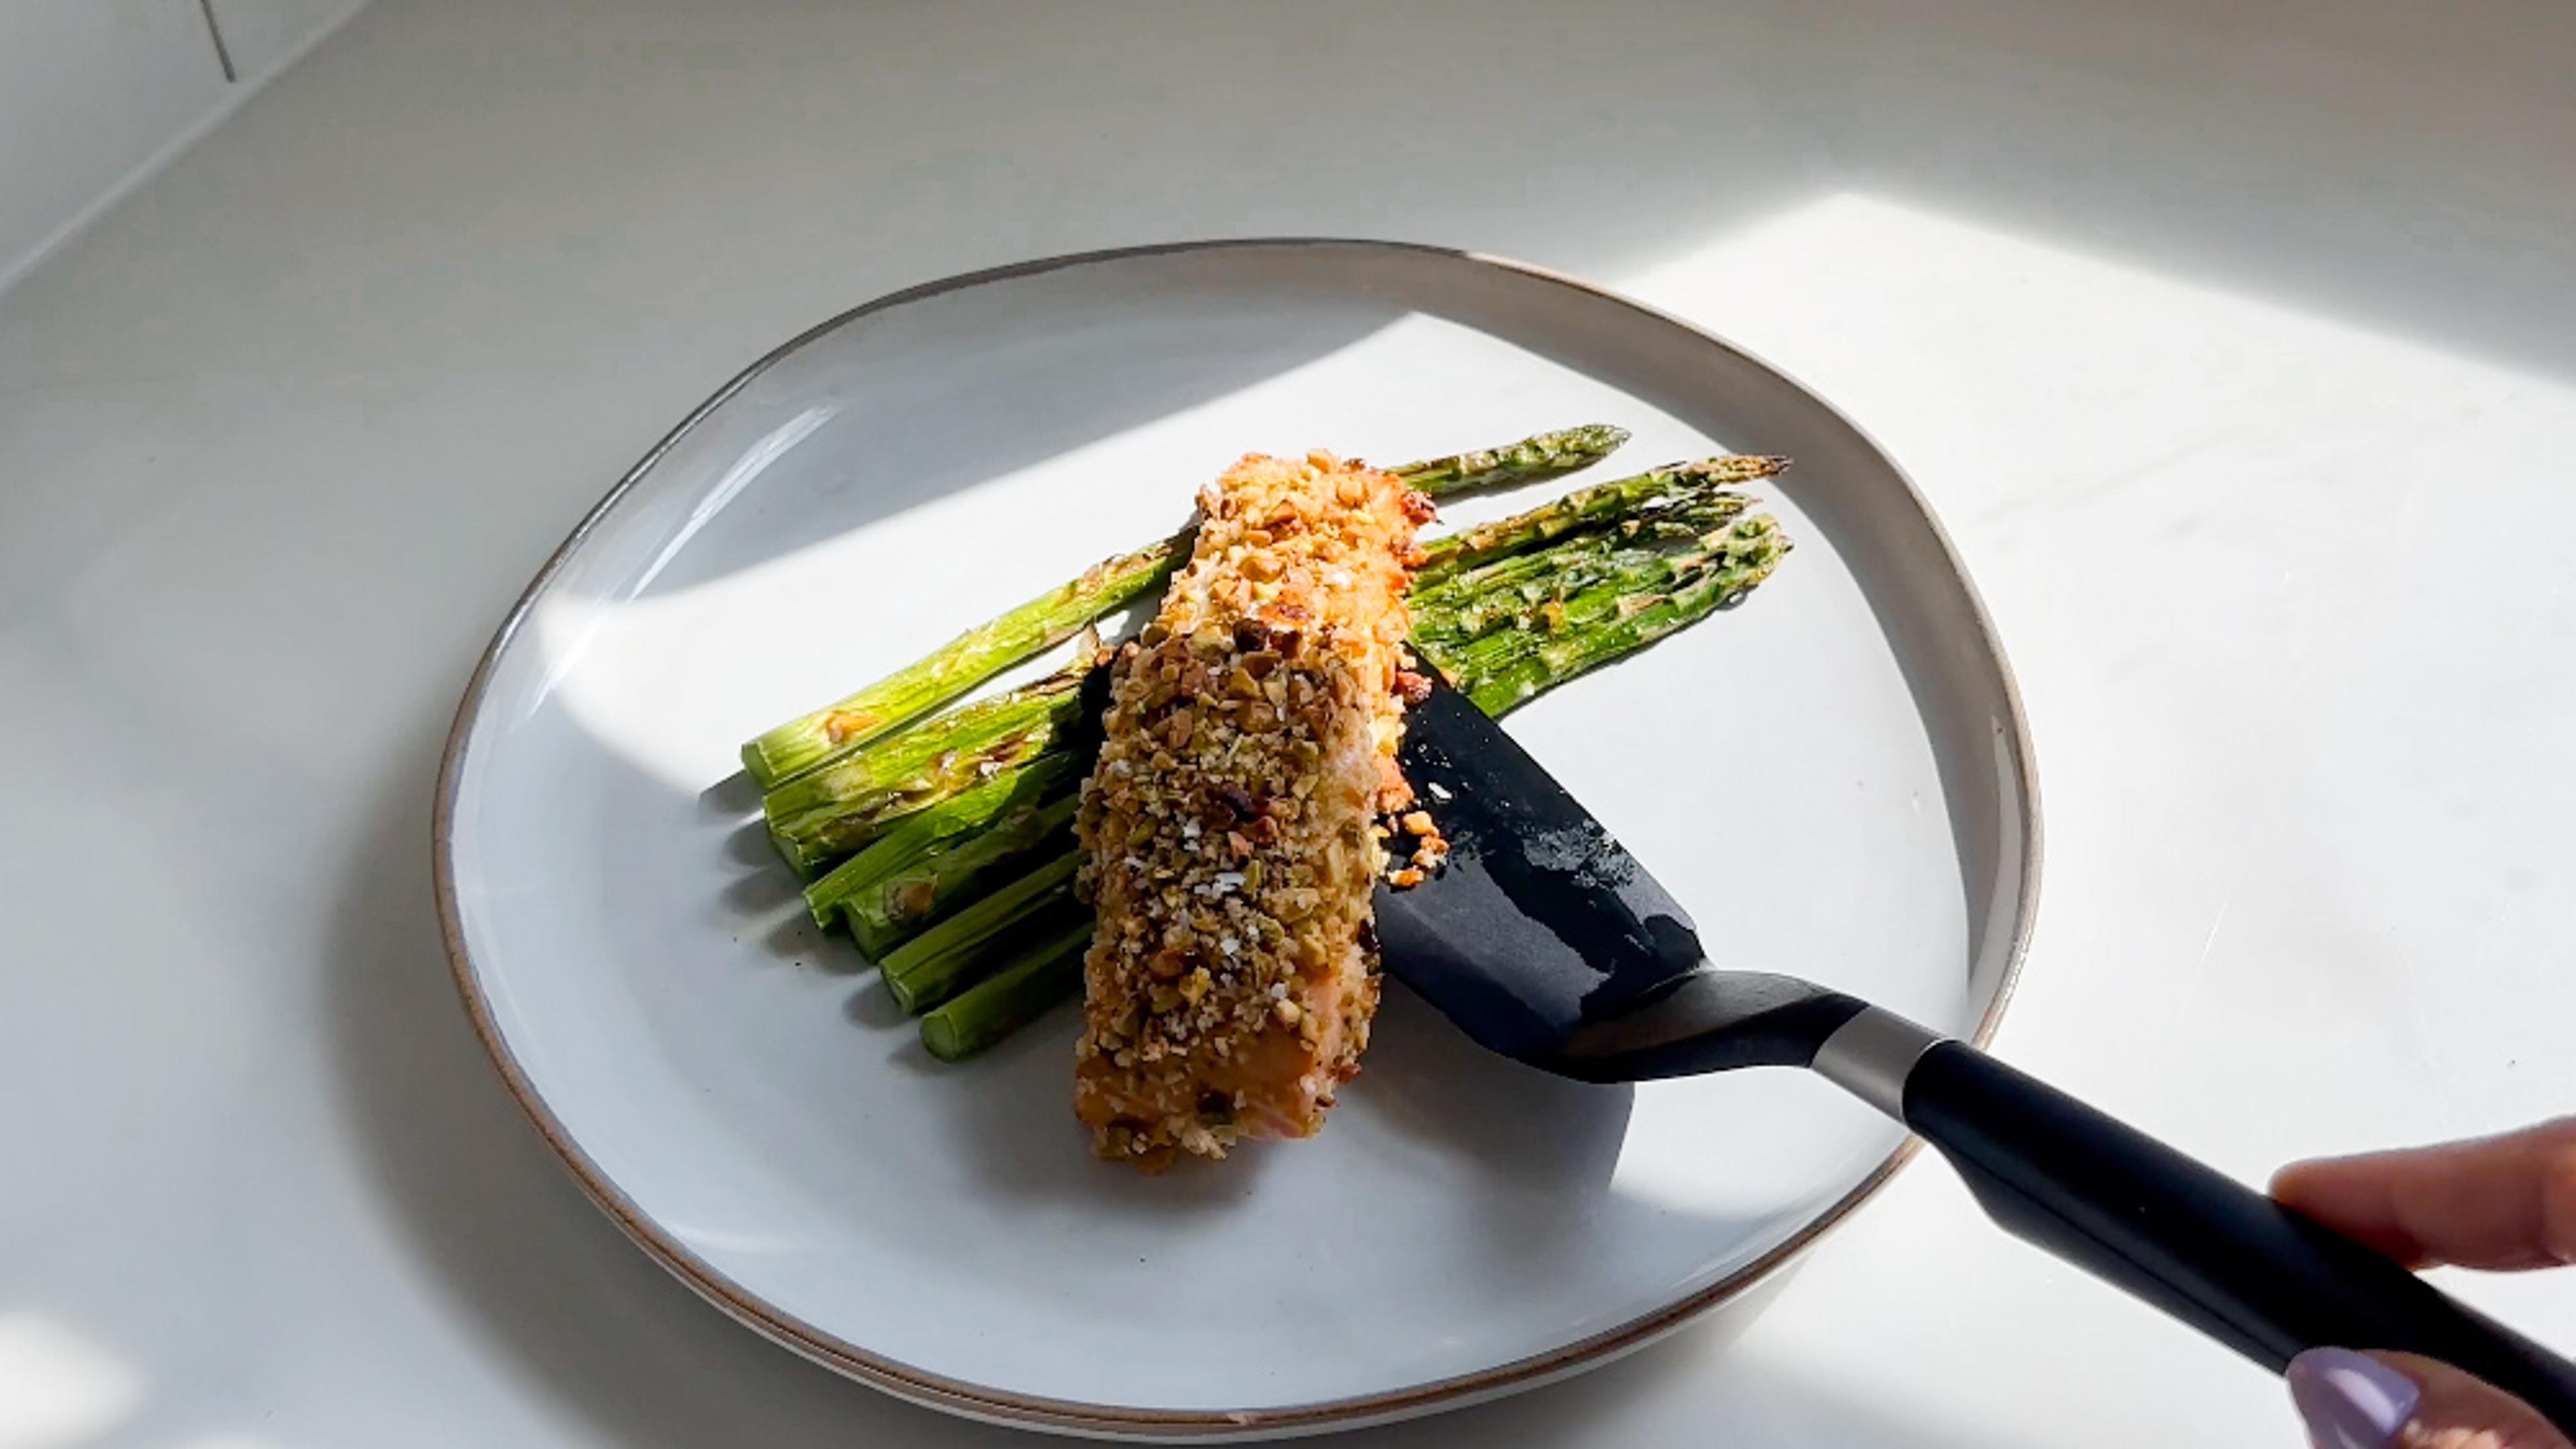 Serve salmon with asparagus on a plate. Top with lemon juice and grated parmesan.